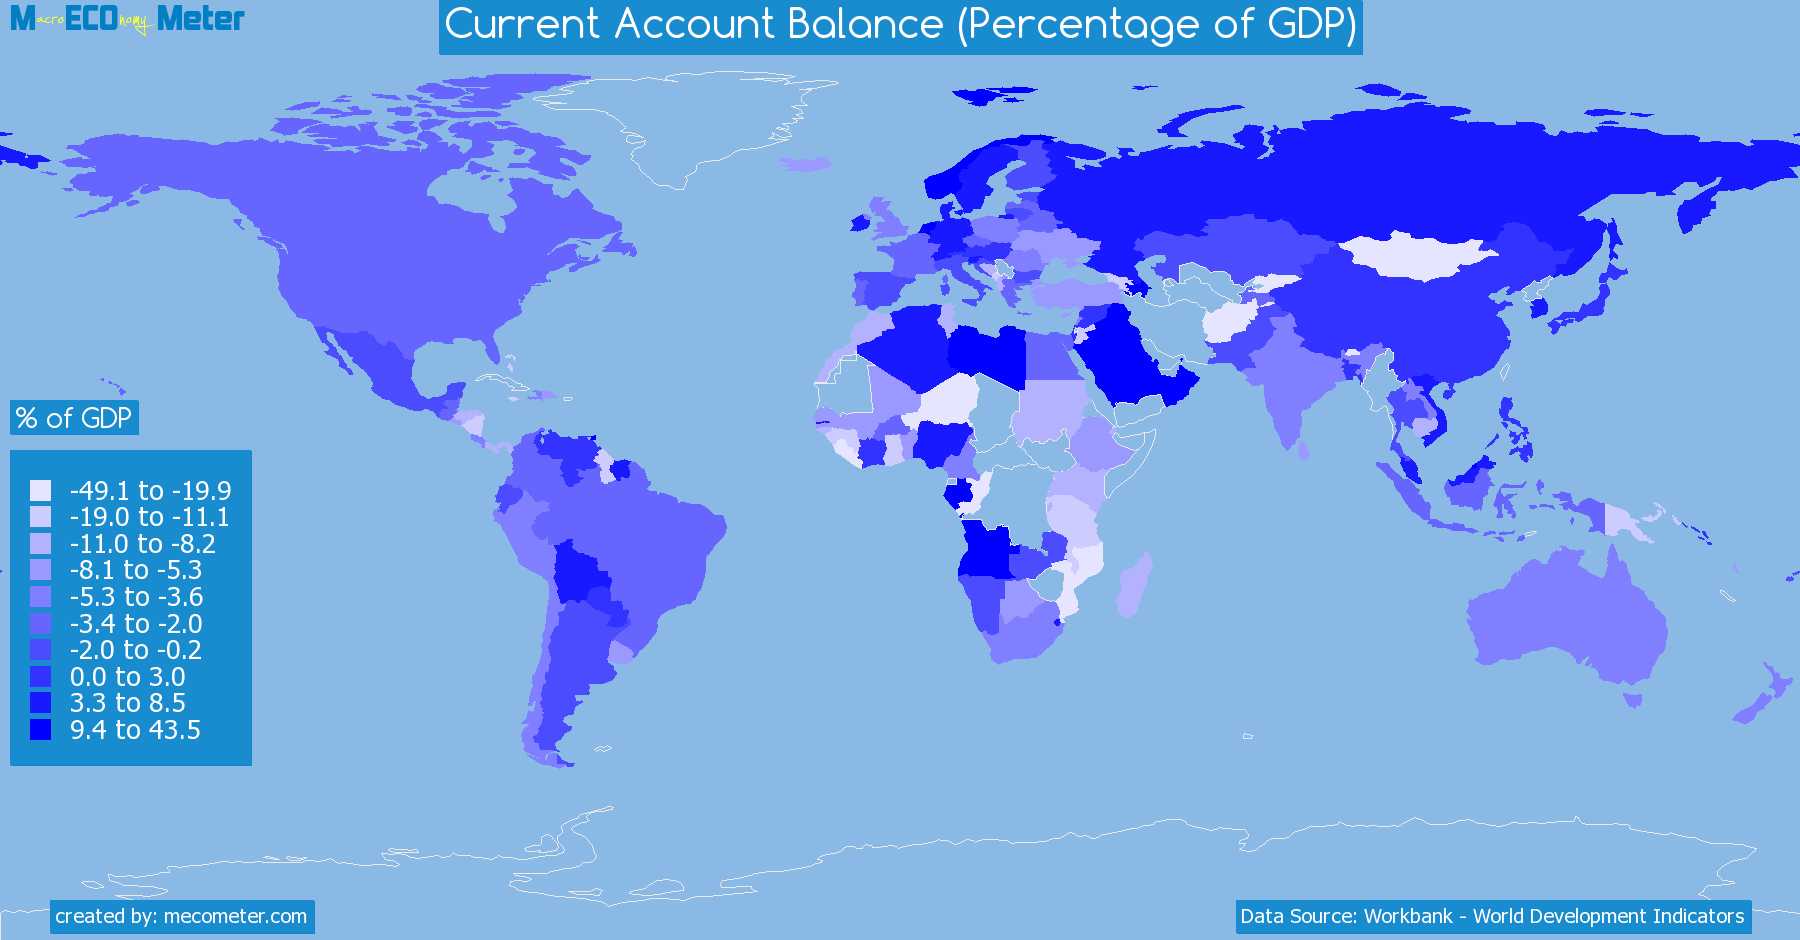 Worldmap of all countries colored to reflect the values of Current Account Balance (Percentage of GDP)